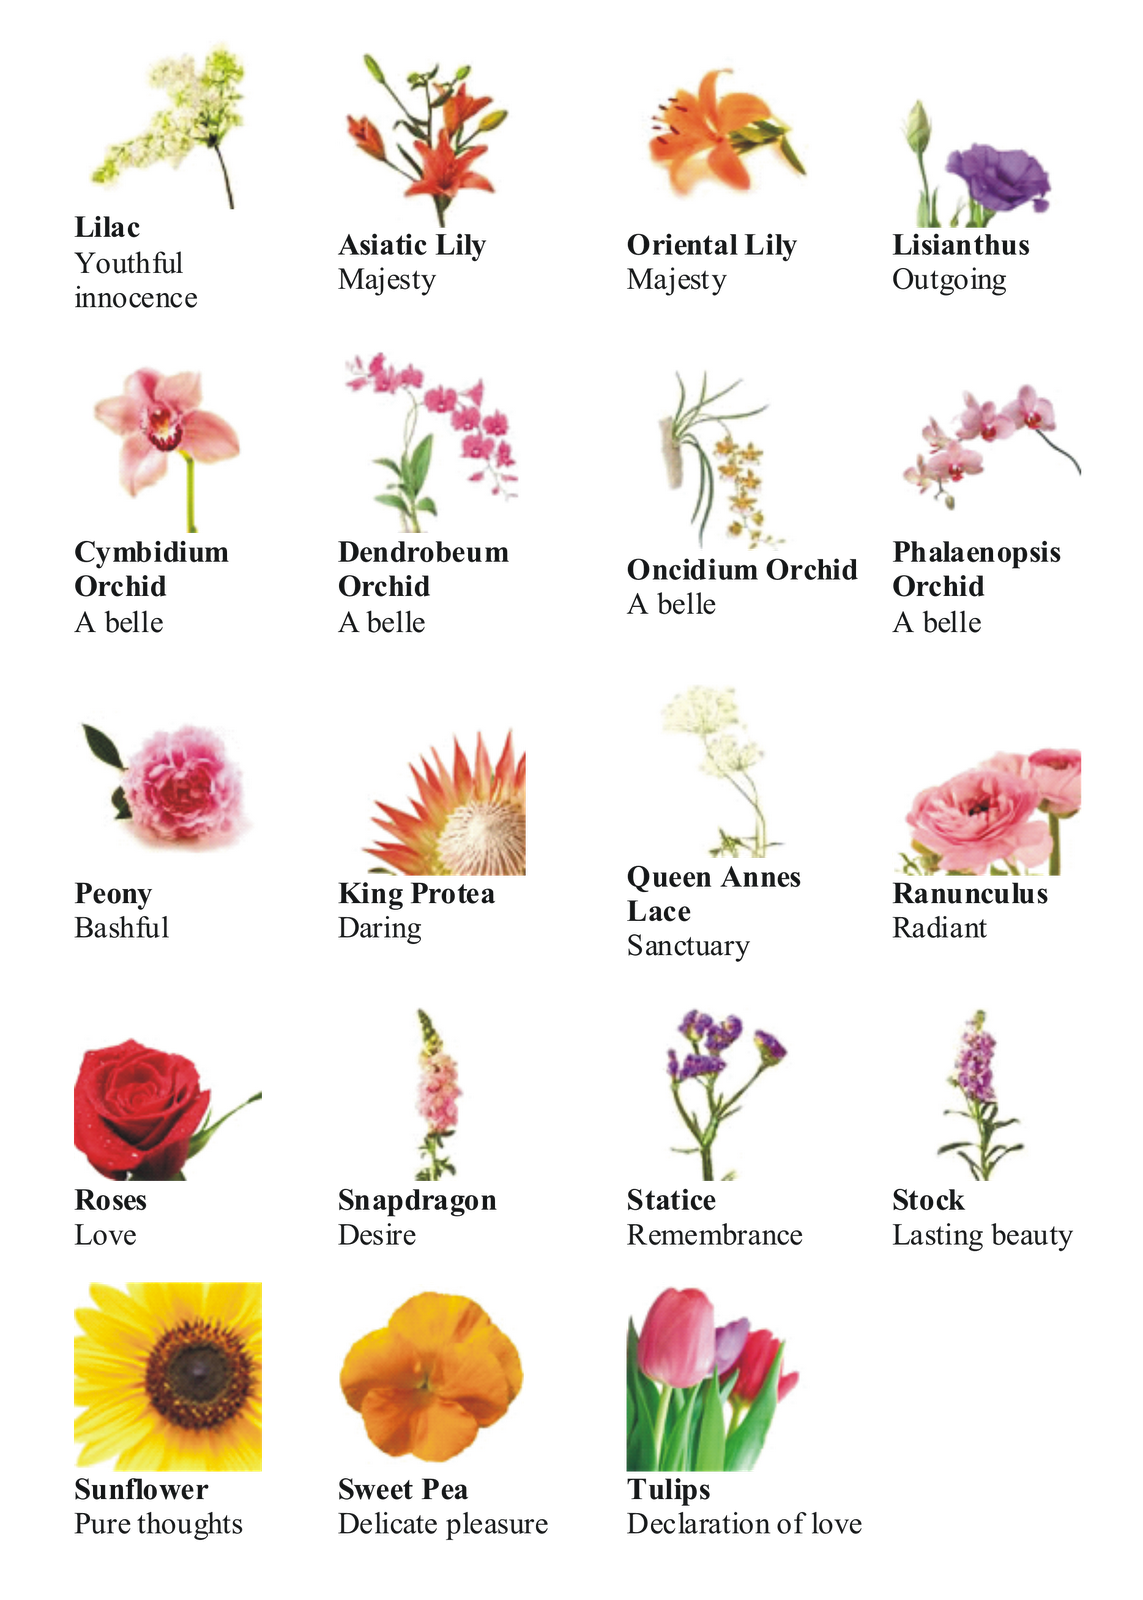 language of flower: different types of flowers